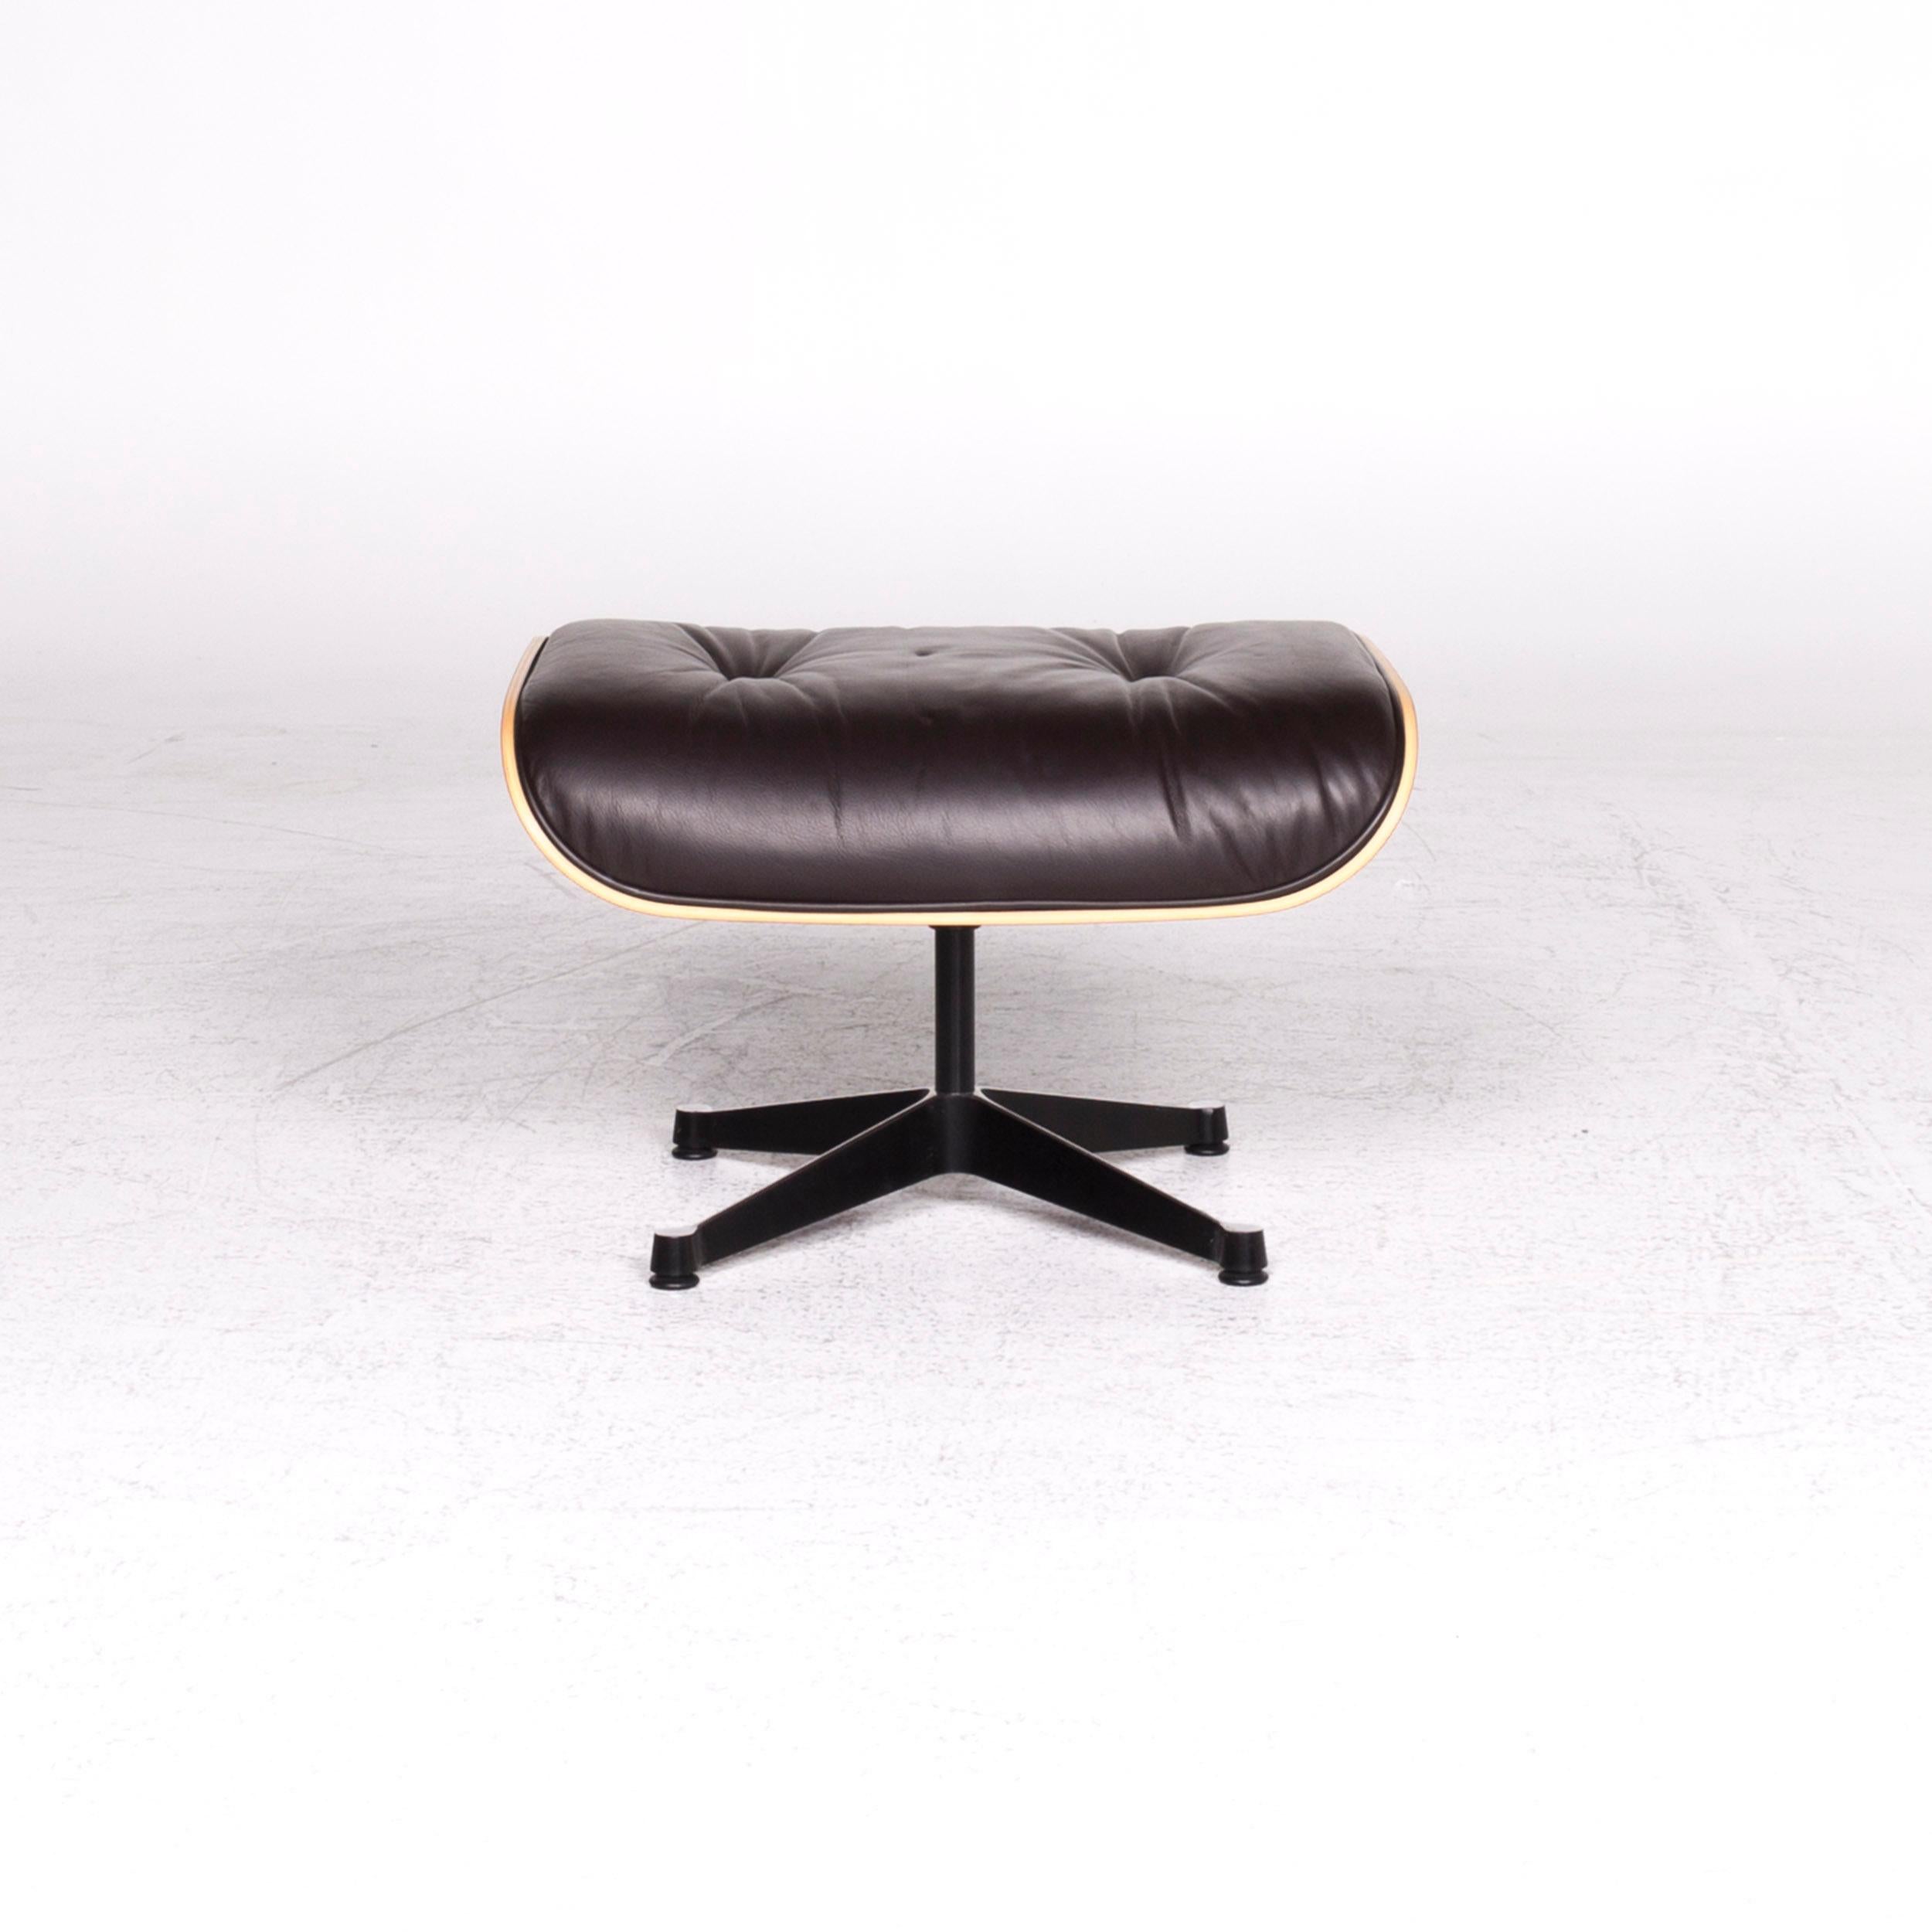 Vitra Eames Lounge Chair Leather Stool Set Brown Charles & Ray Eames Chair For Sale 9